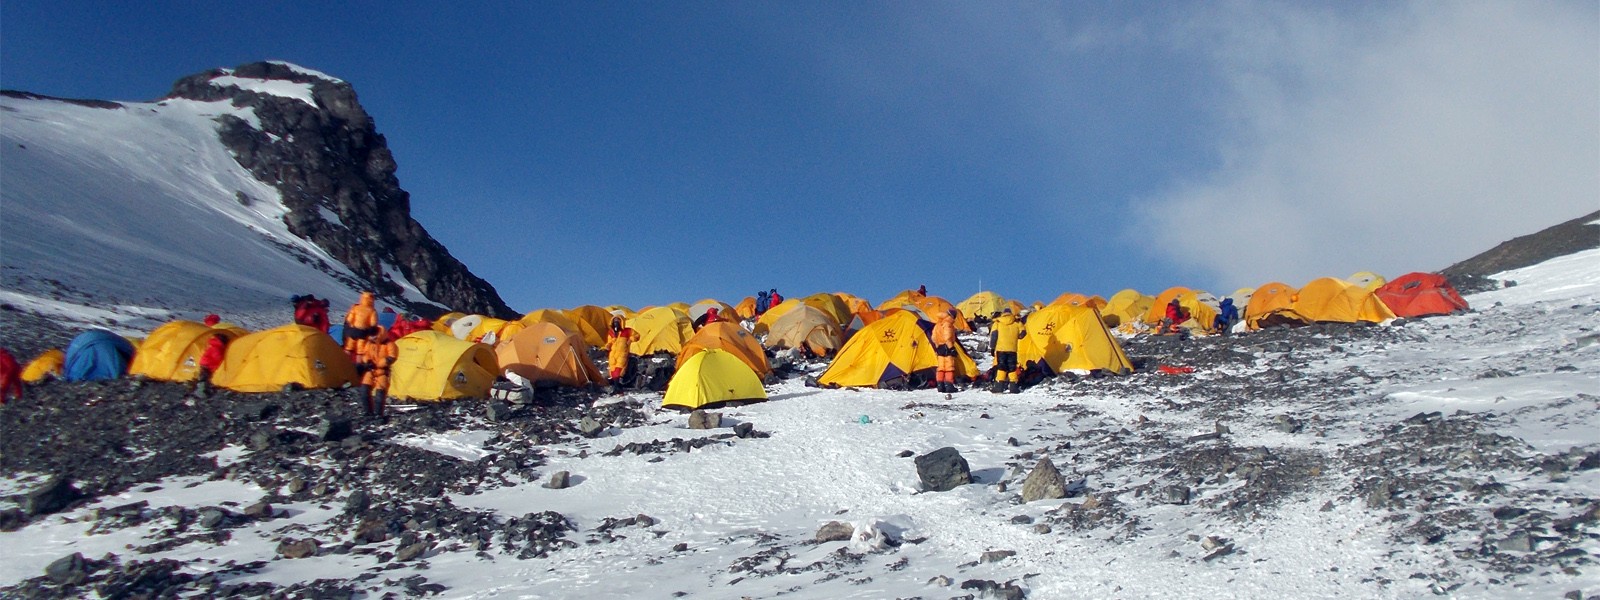 Mount Everest South Col Expedition 